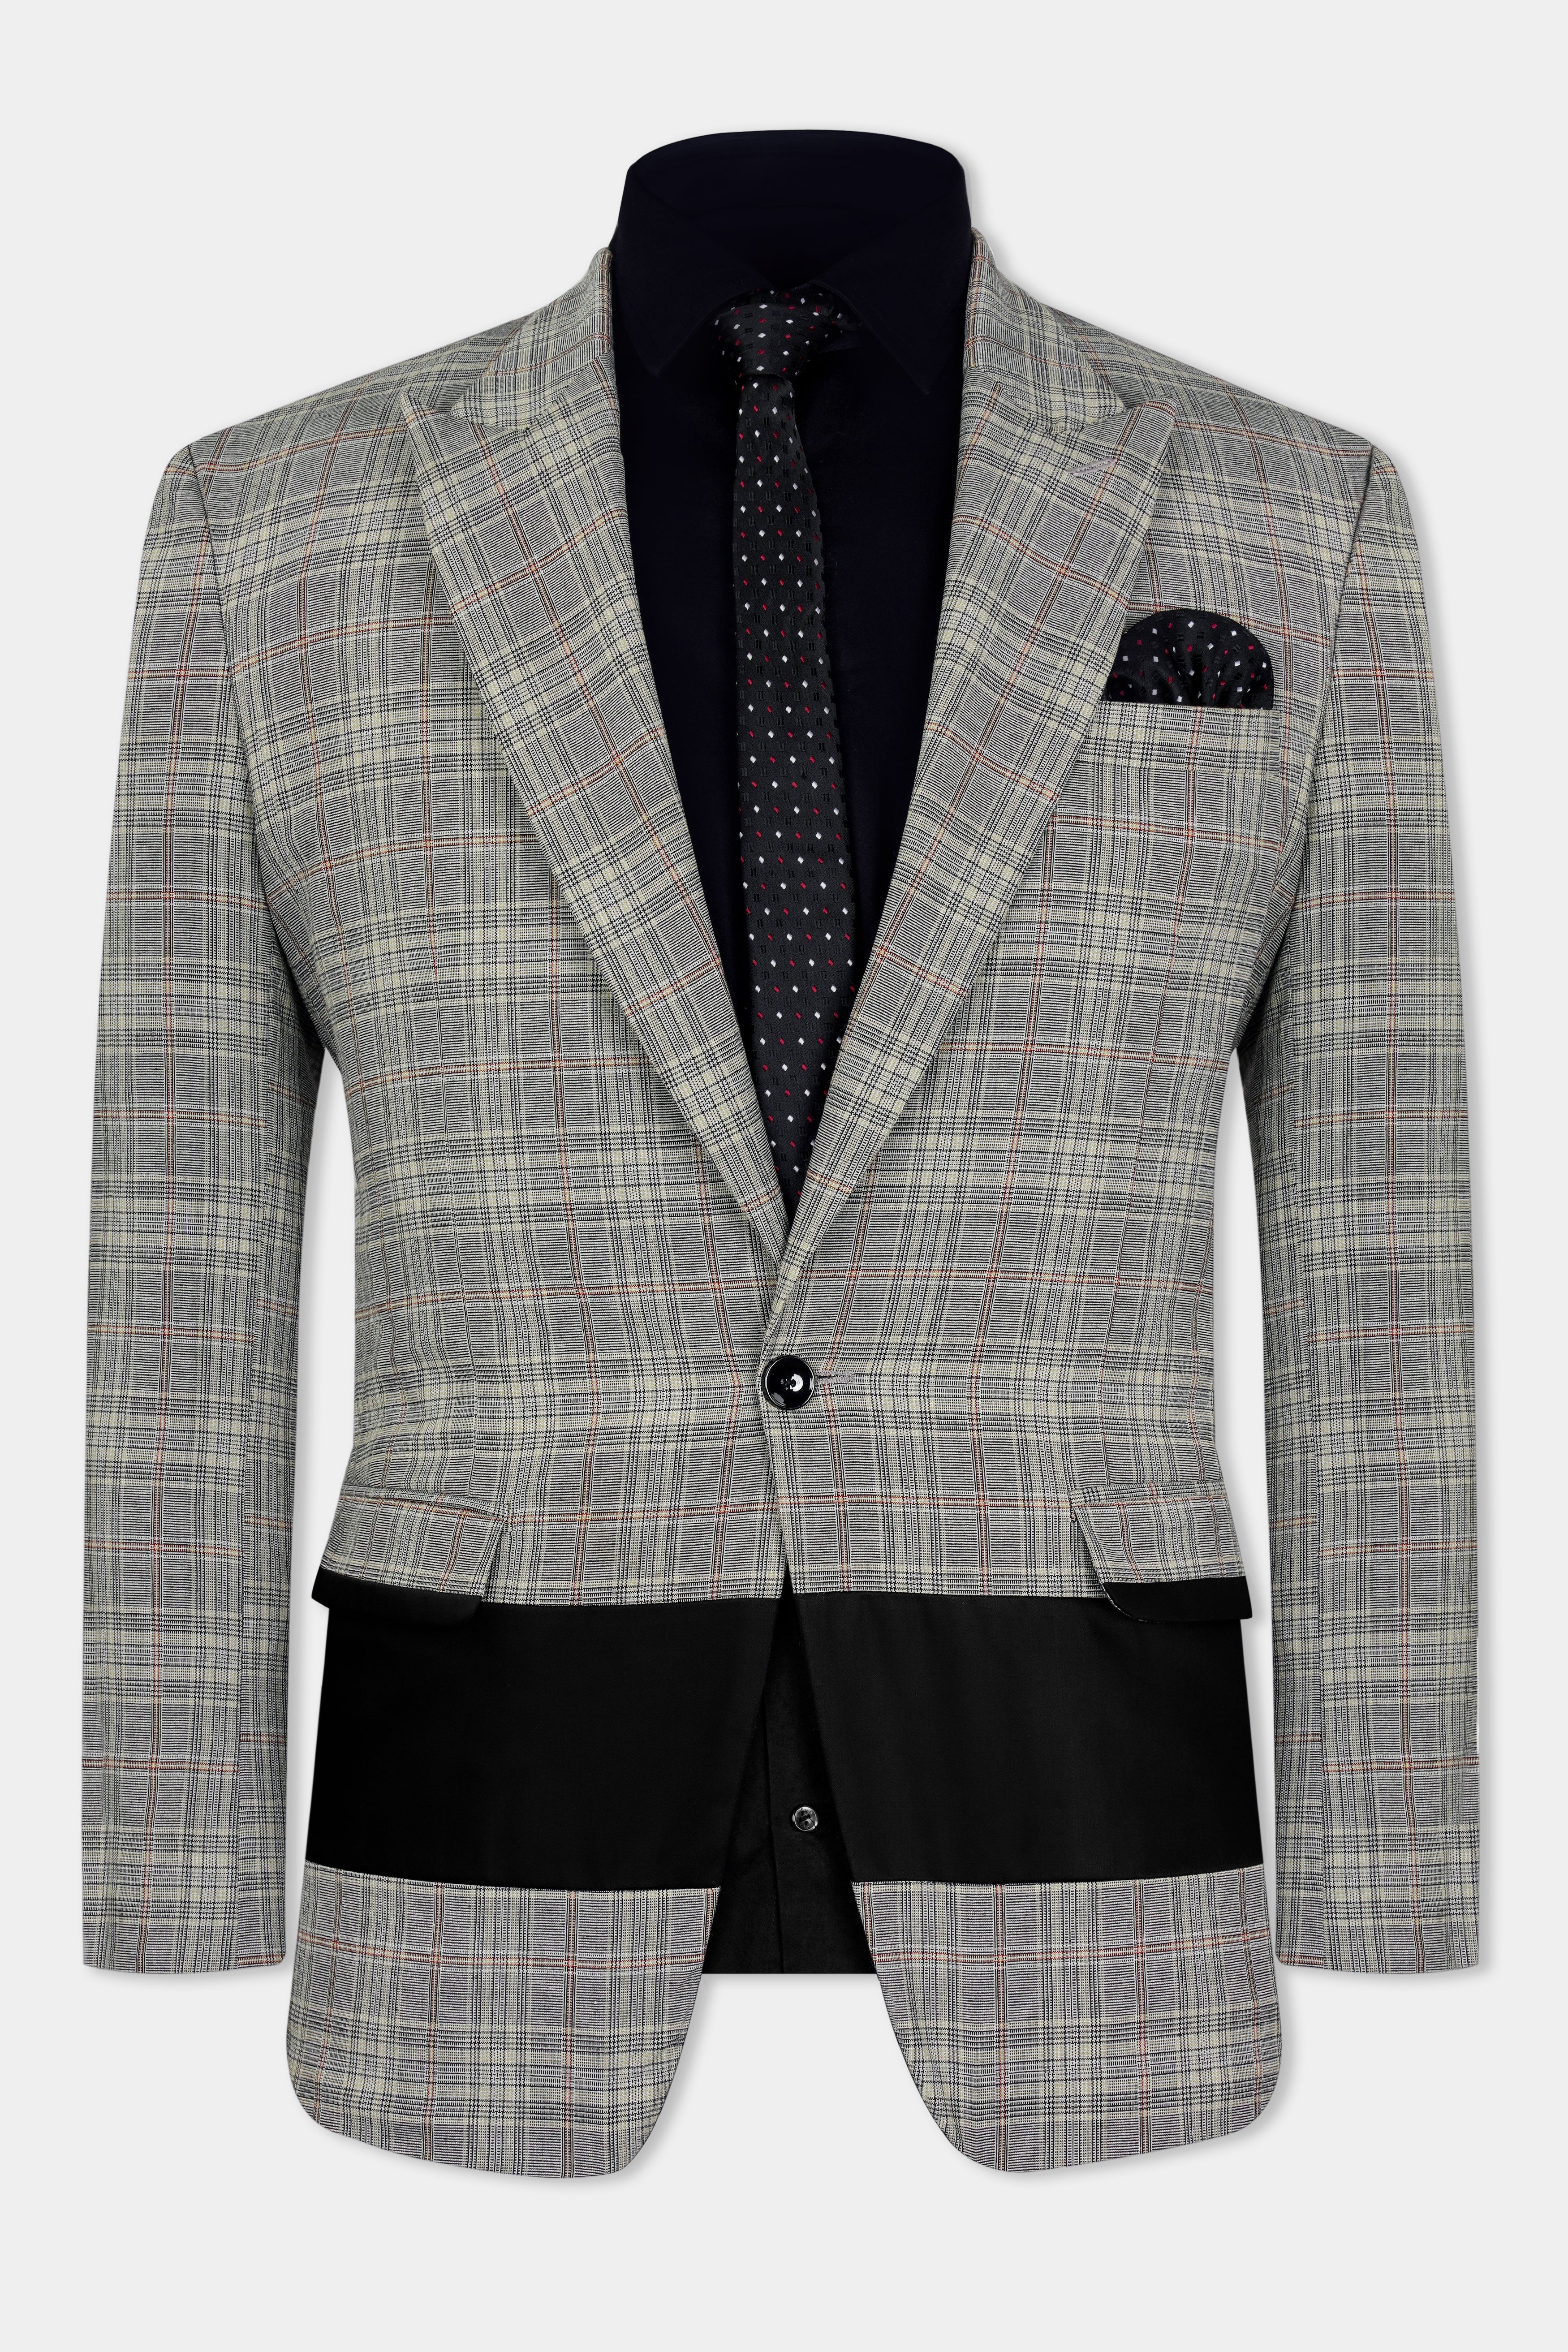 Chalice Gray Plaid and Black Wool Rich Designer Blazer BL2928-SBP-D73-36, BL2928-SBP-D73-38, BL2928-SBP-D73-40, BL2928-SBP-D73-42, BL2928-SBP-D73-44, BL2928-SBP-D73-46, BL2928-SBP-D73-48, BL2928-SBP-D73-50, BL2928-SBP-D73-52, BL2928-SBP-D73-54, BL2928-SBP-D73-56, BL2928-SBP-D73-58, BL2928-SBP-D73-60